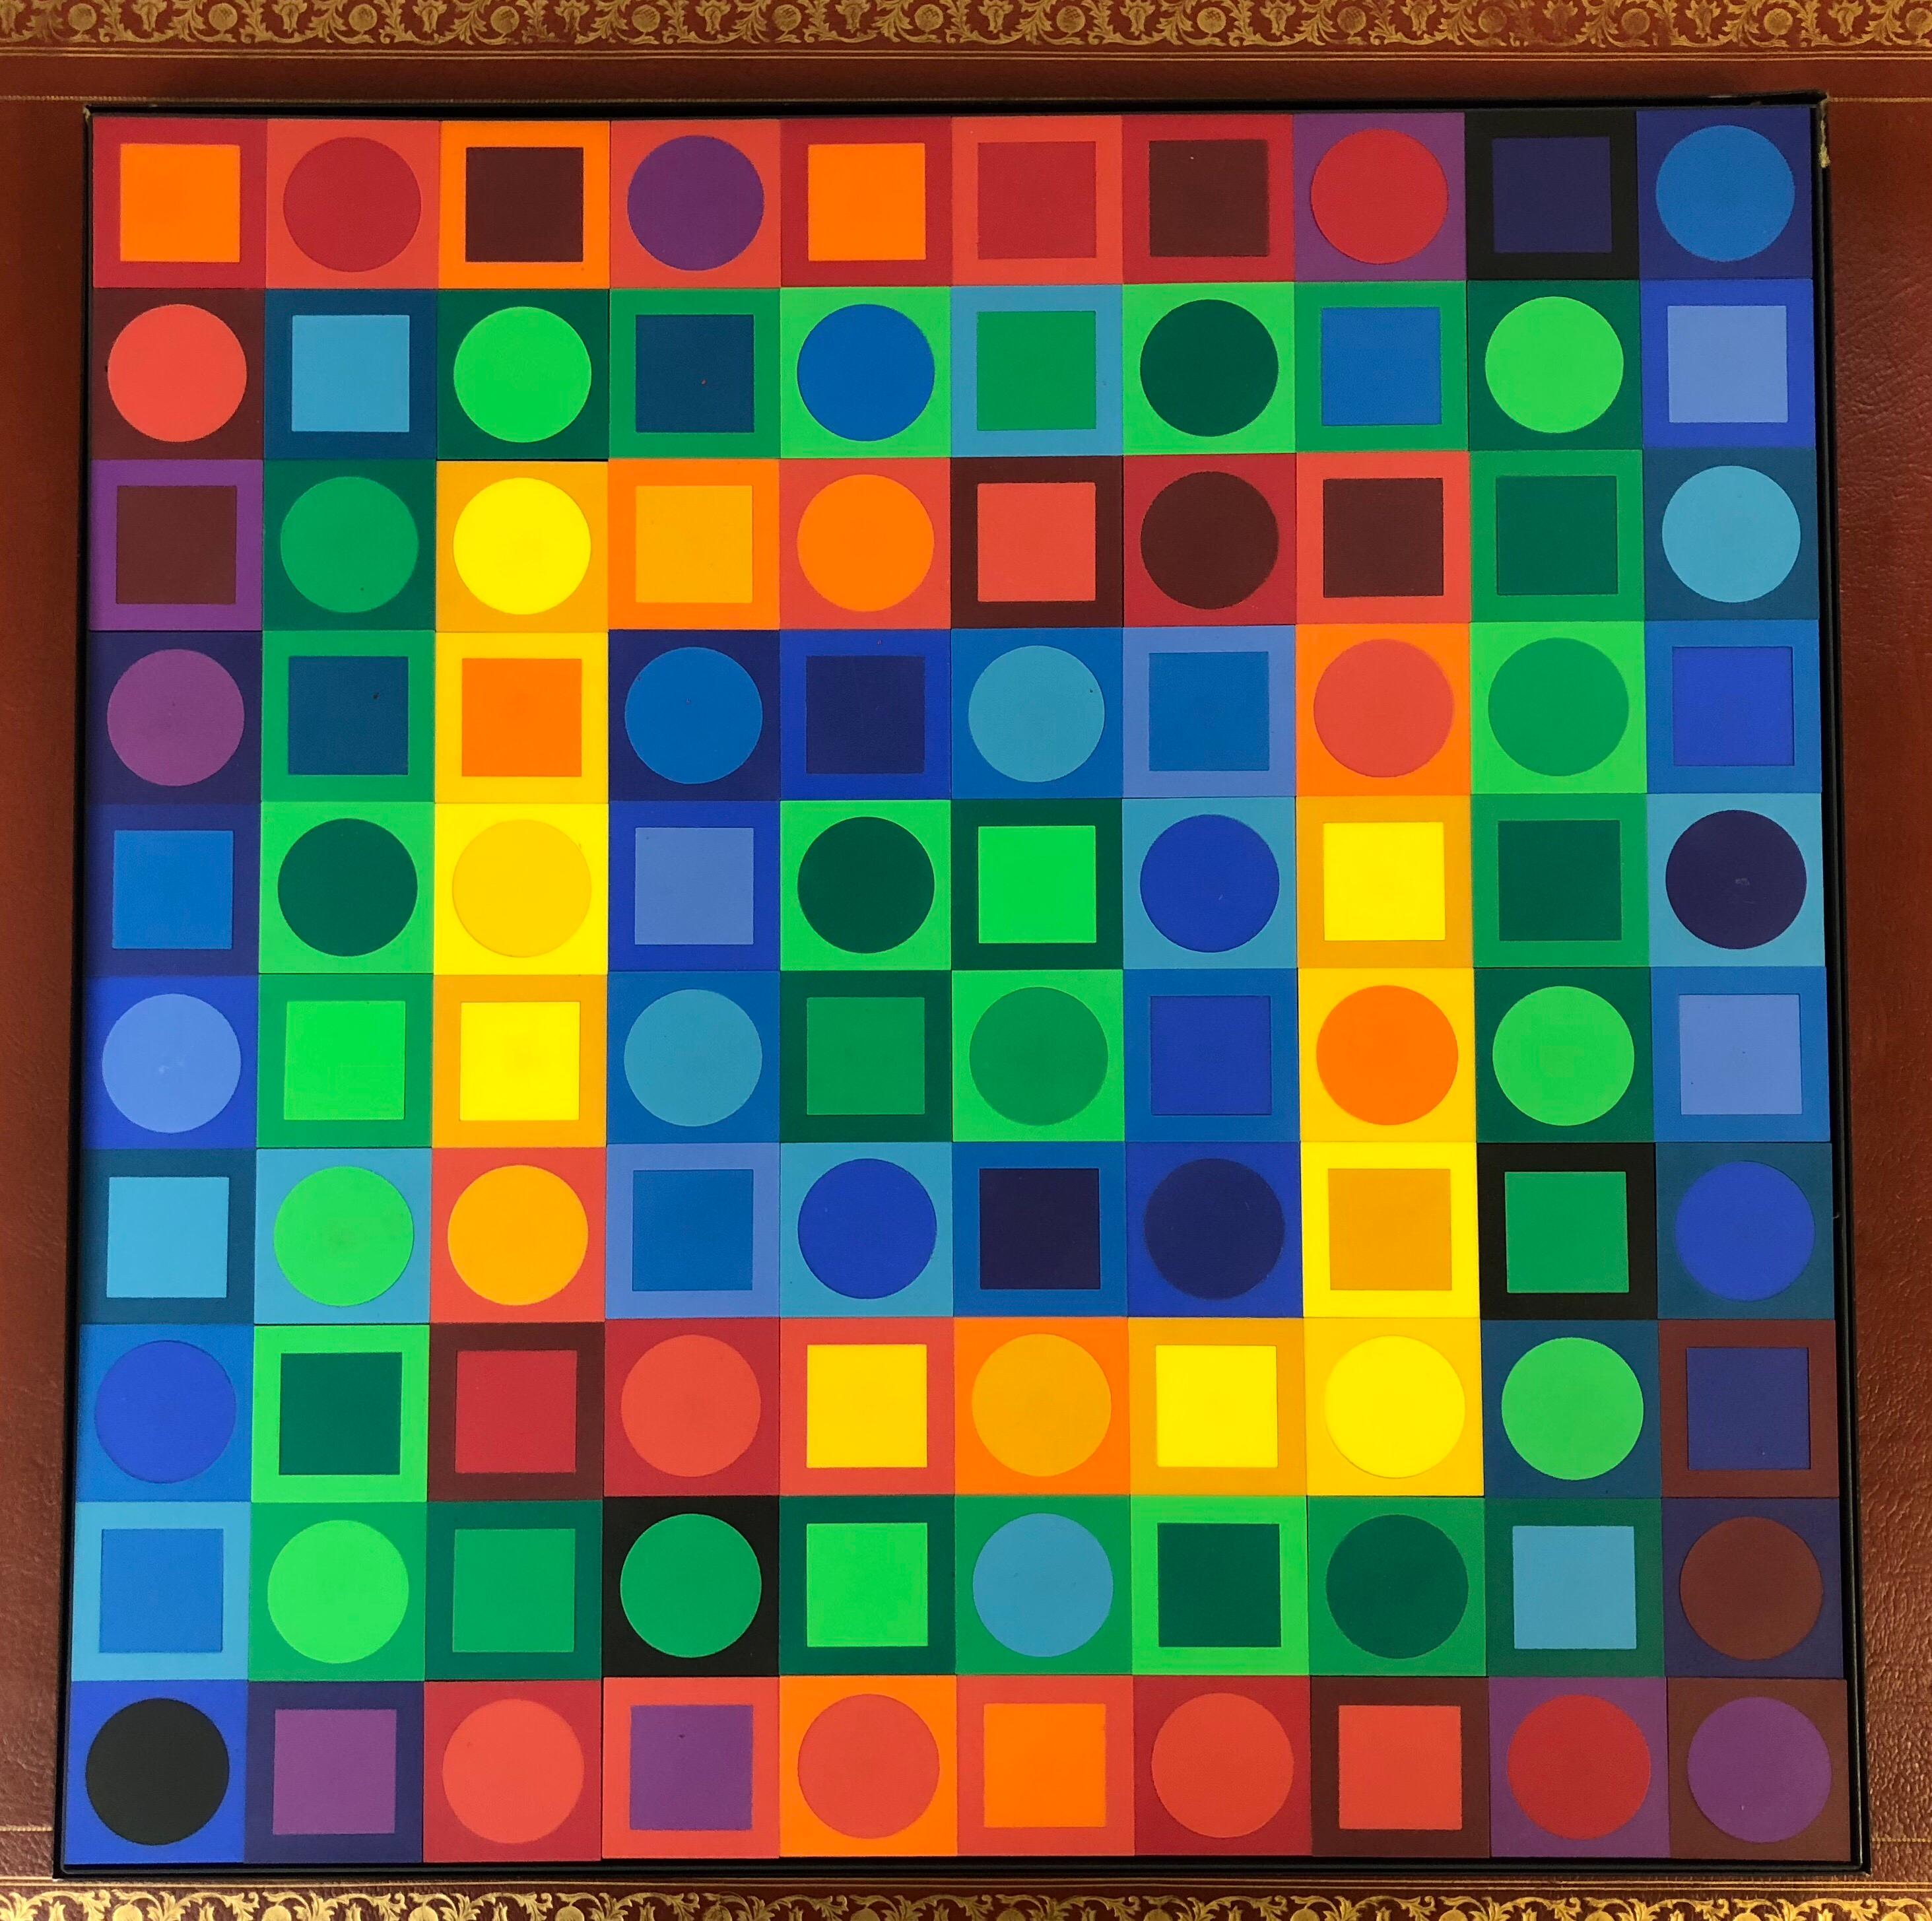 This is a puzzle by Vasarely. An interactive work of art. The plastic pieces have little magnets on the back. The design is displayed in a thin metal tray that can be hung. As presented it takes 200 pieces to complete the design, and there are also